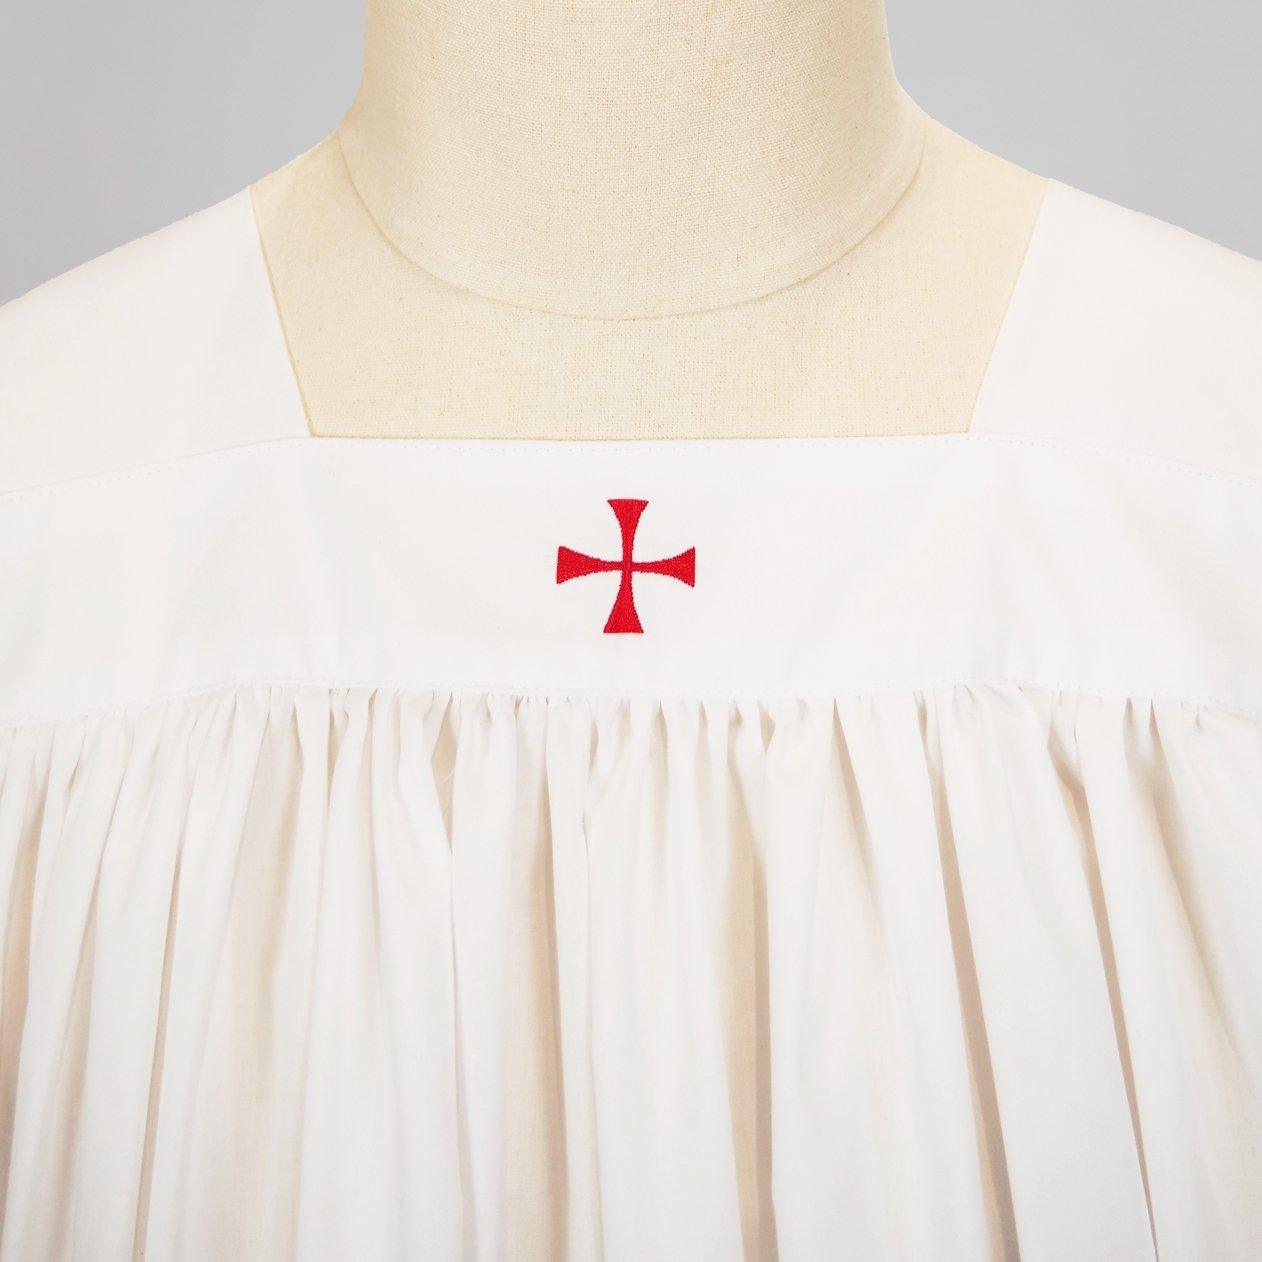 Gathered Choir Cotta with Red Crosses - Watts & Co.